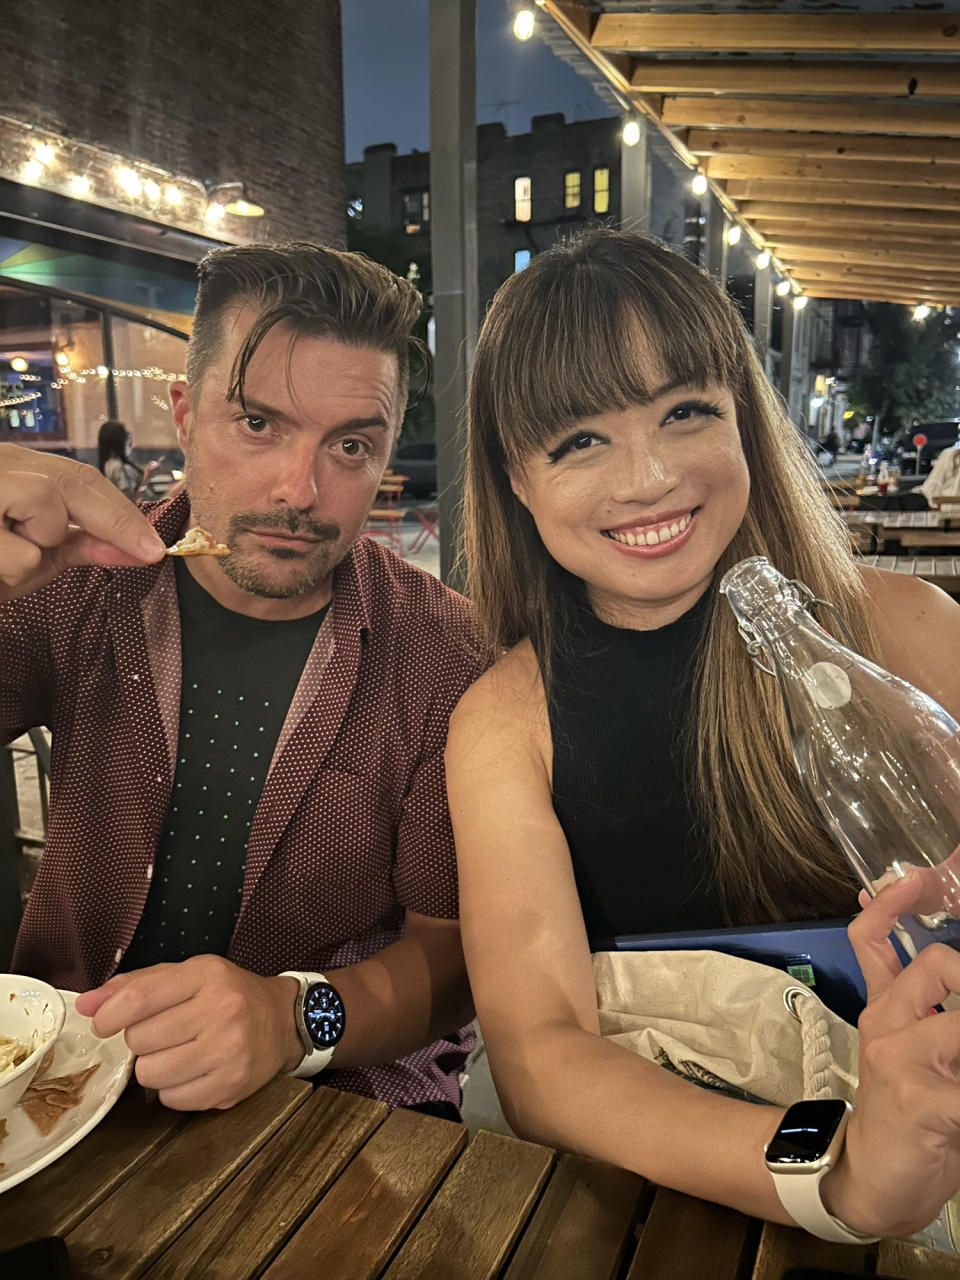 <p>A photo from the iPhone 14 showing a man and woman posing with food and a water tumbler at an outdoor restaurant at night.</p>
